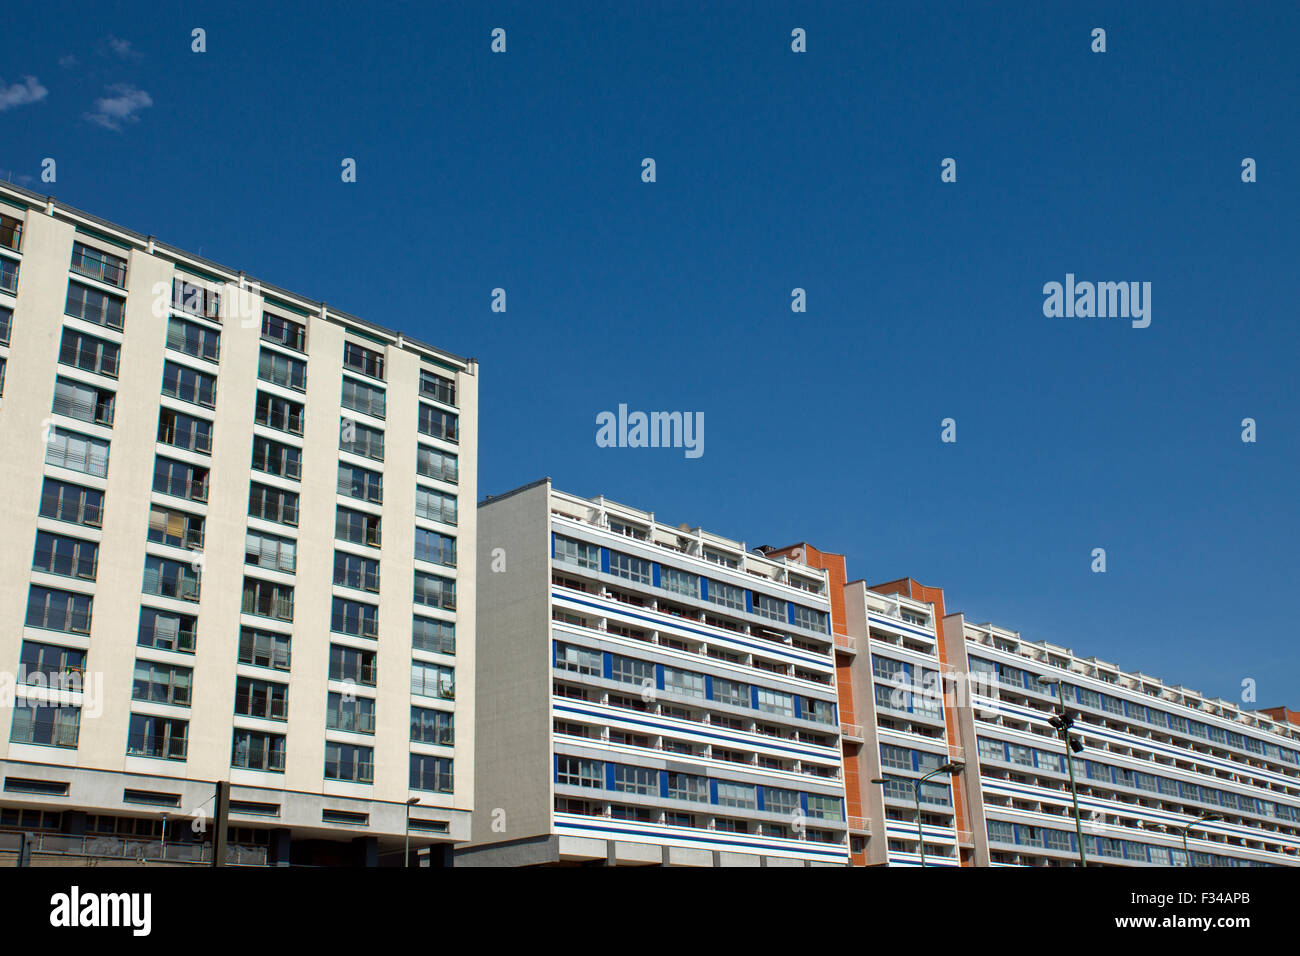 Buildings made of precast concrete slabs in East Berlin Stock Photo